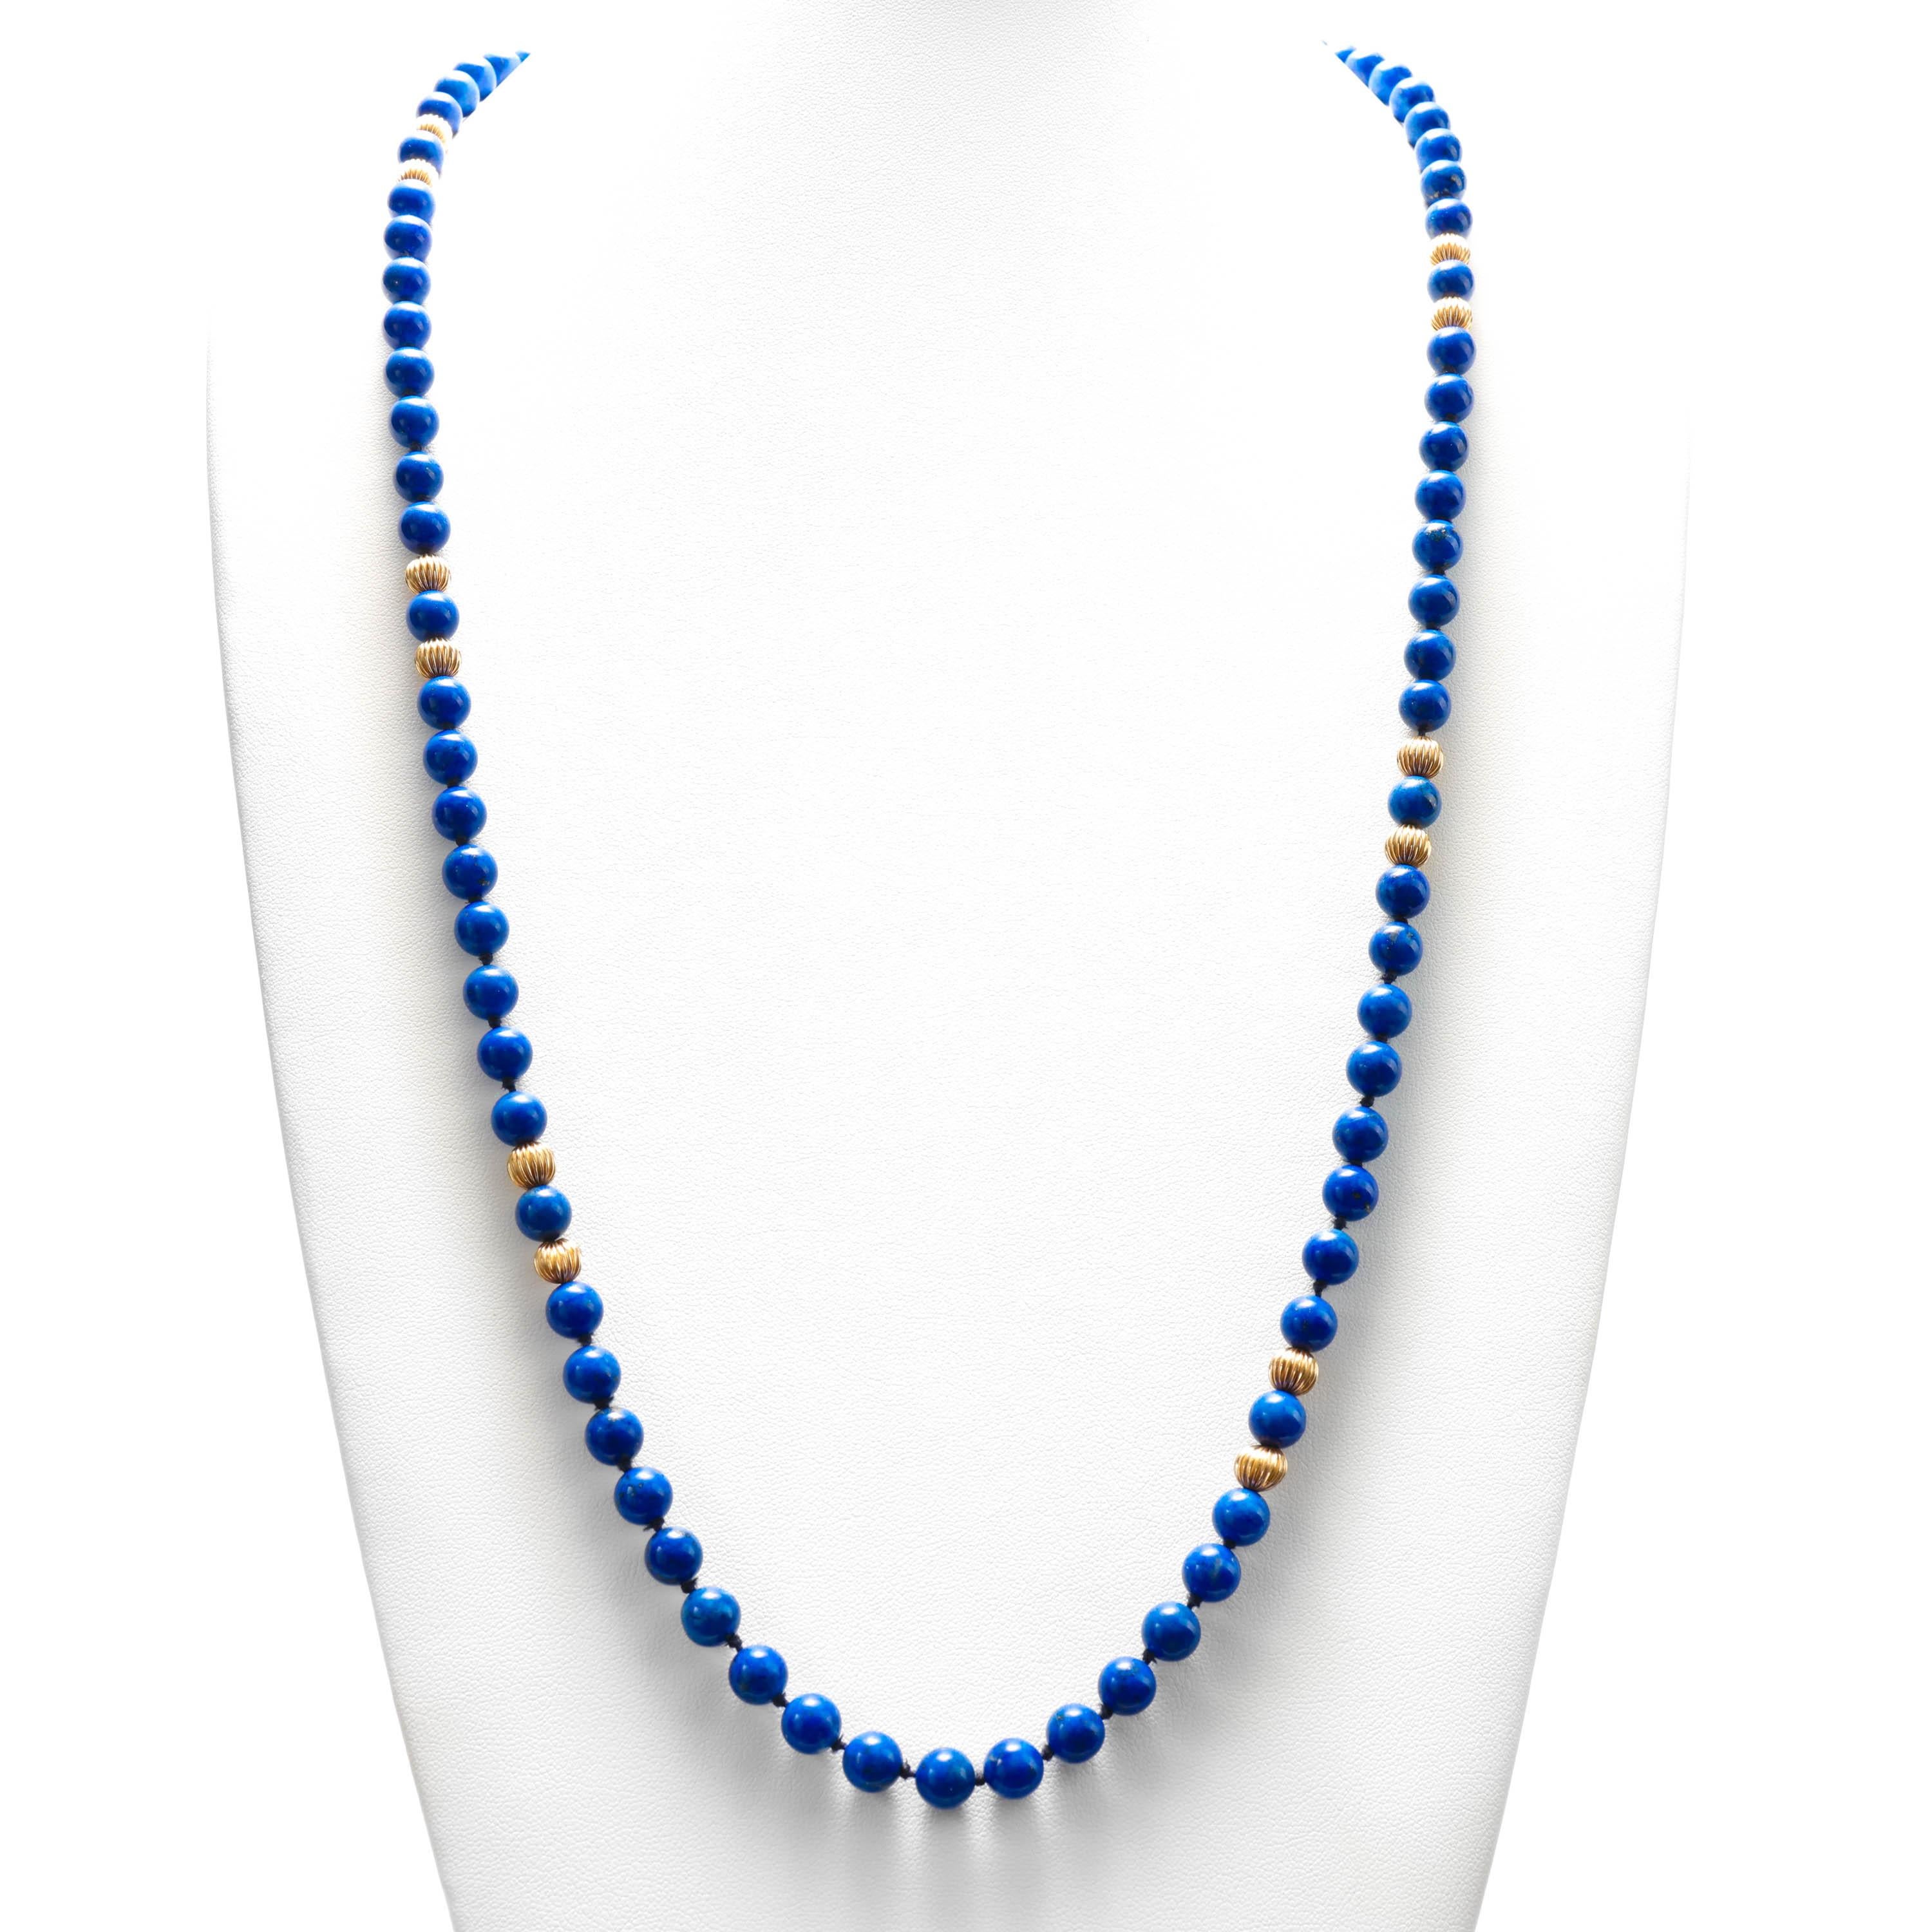 Women's or Men's Lapis Lazuli and Gold Bead Necklace 31